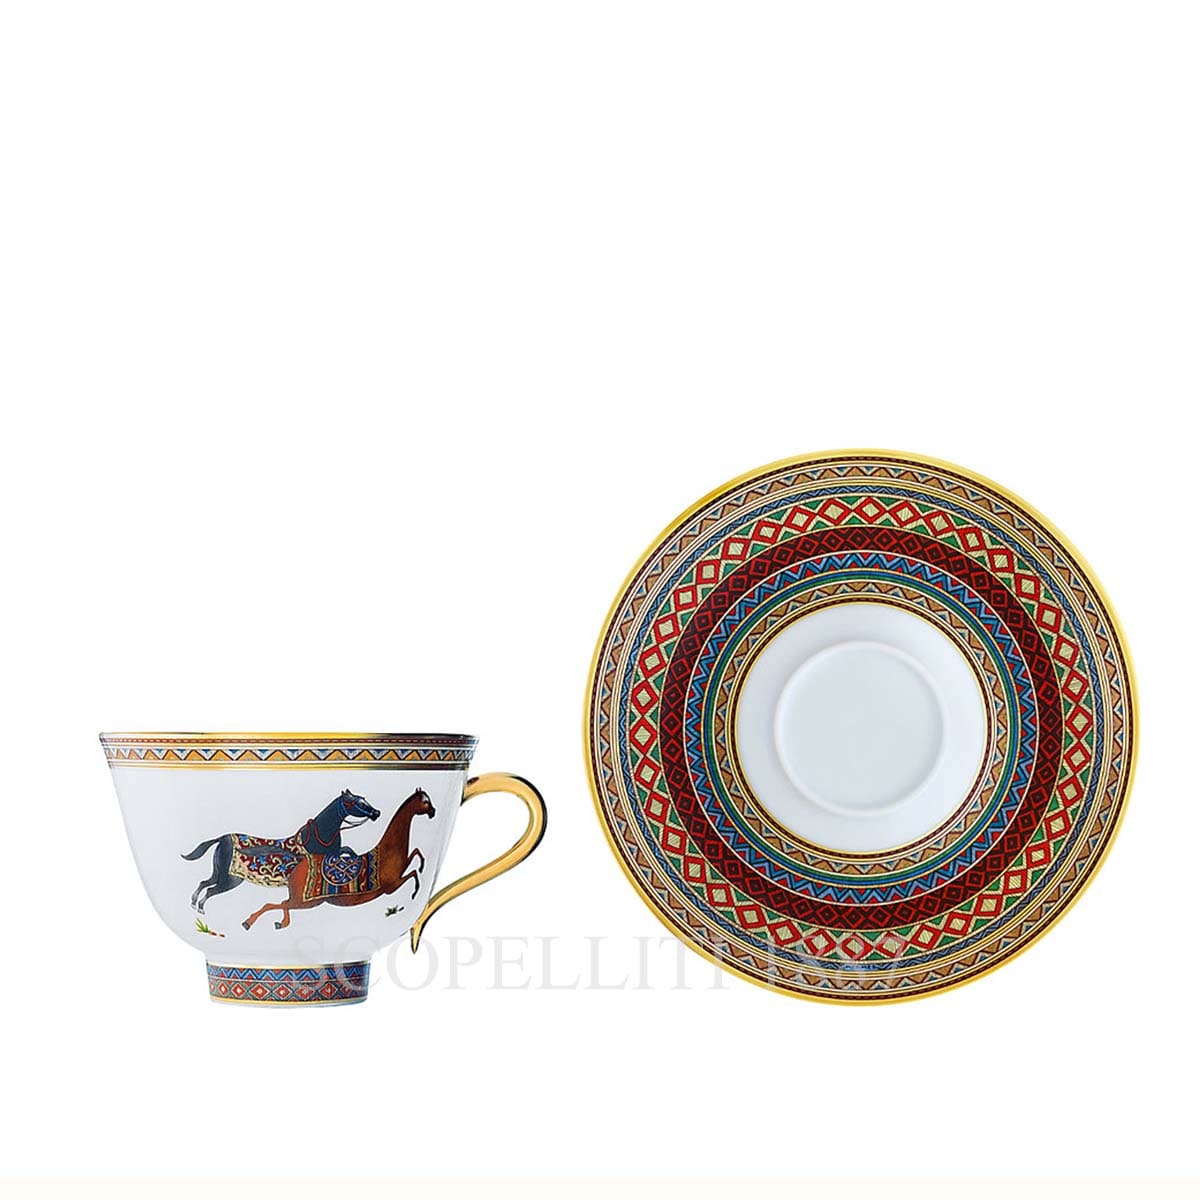 Hermes Tea Cup and Saucer n°6 Cheval d'Orient - SCOPELLITI 1887